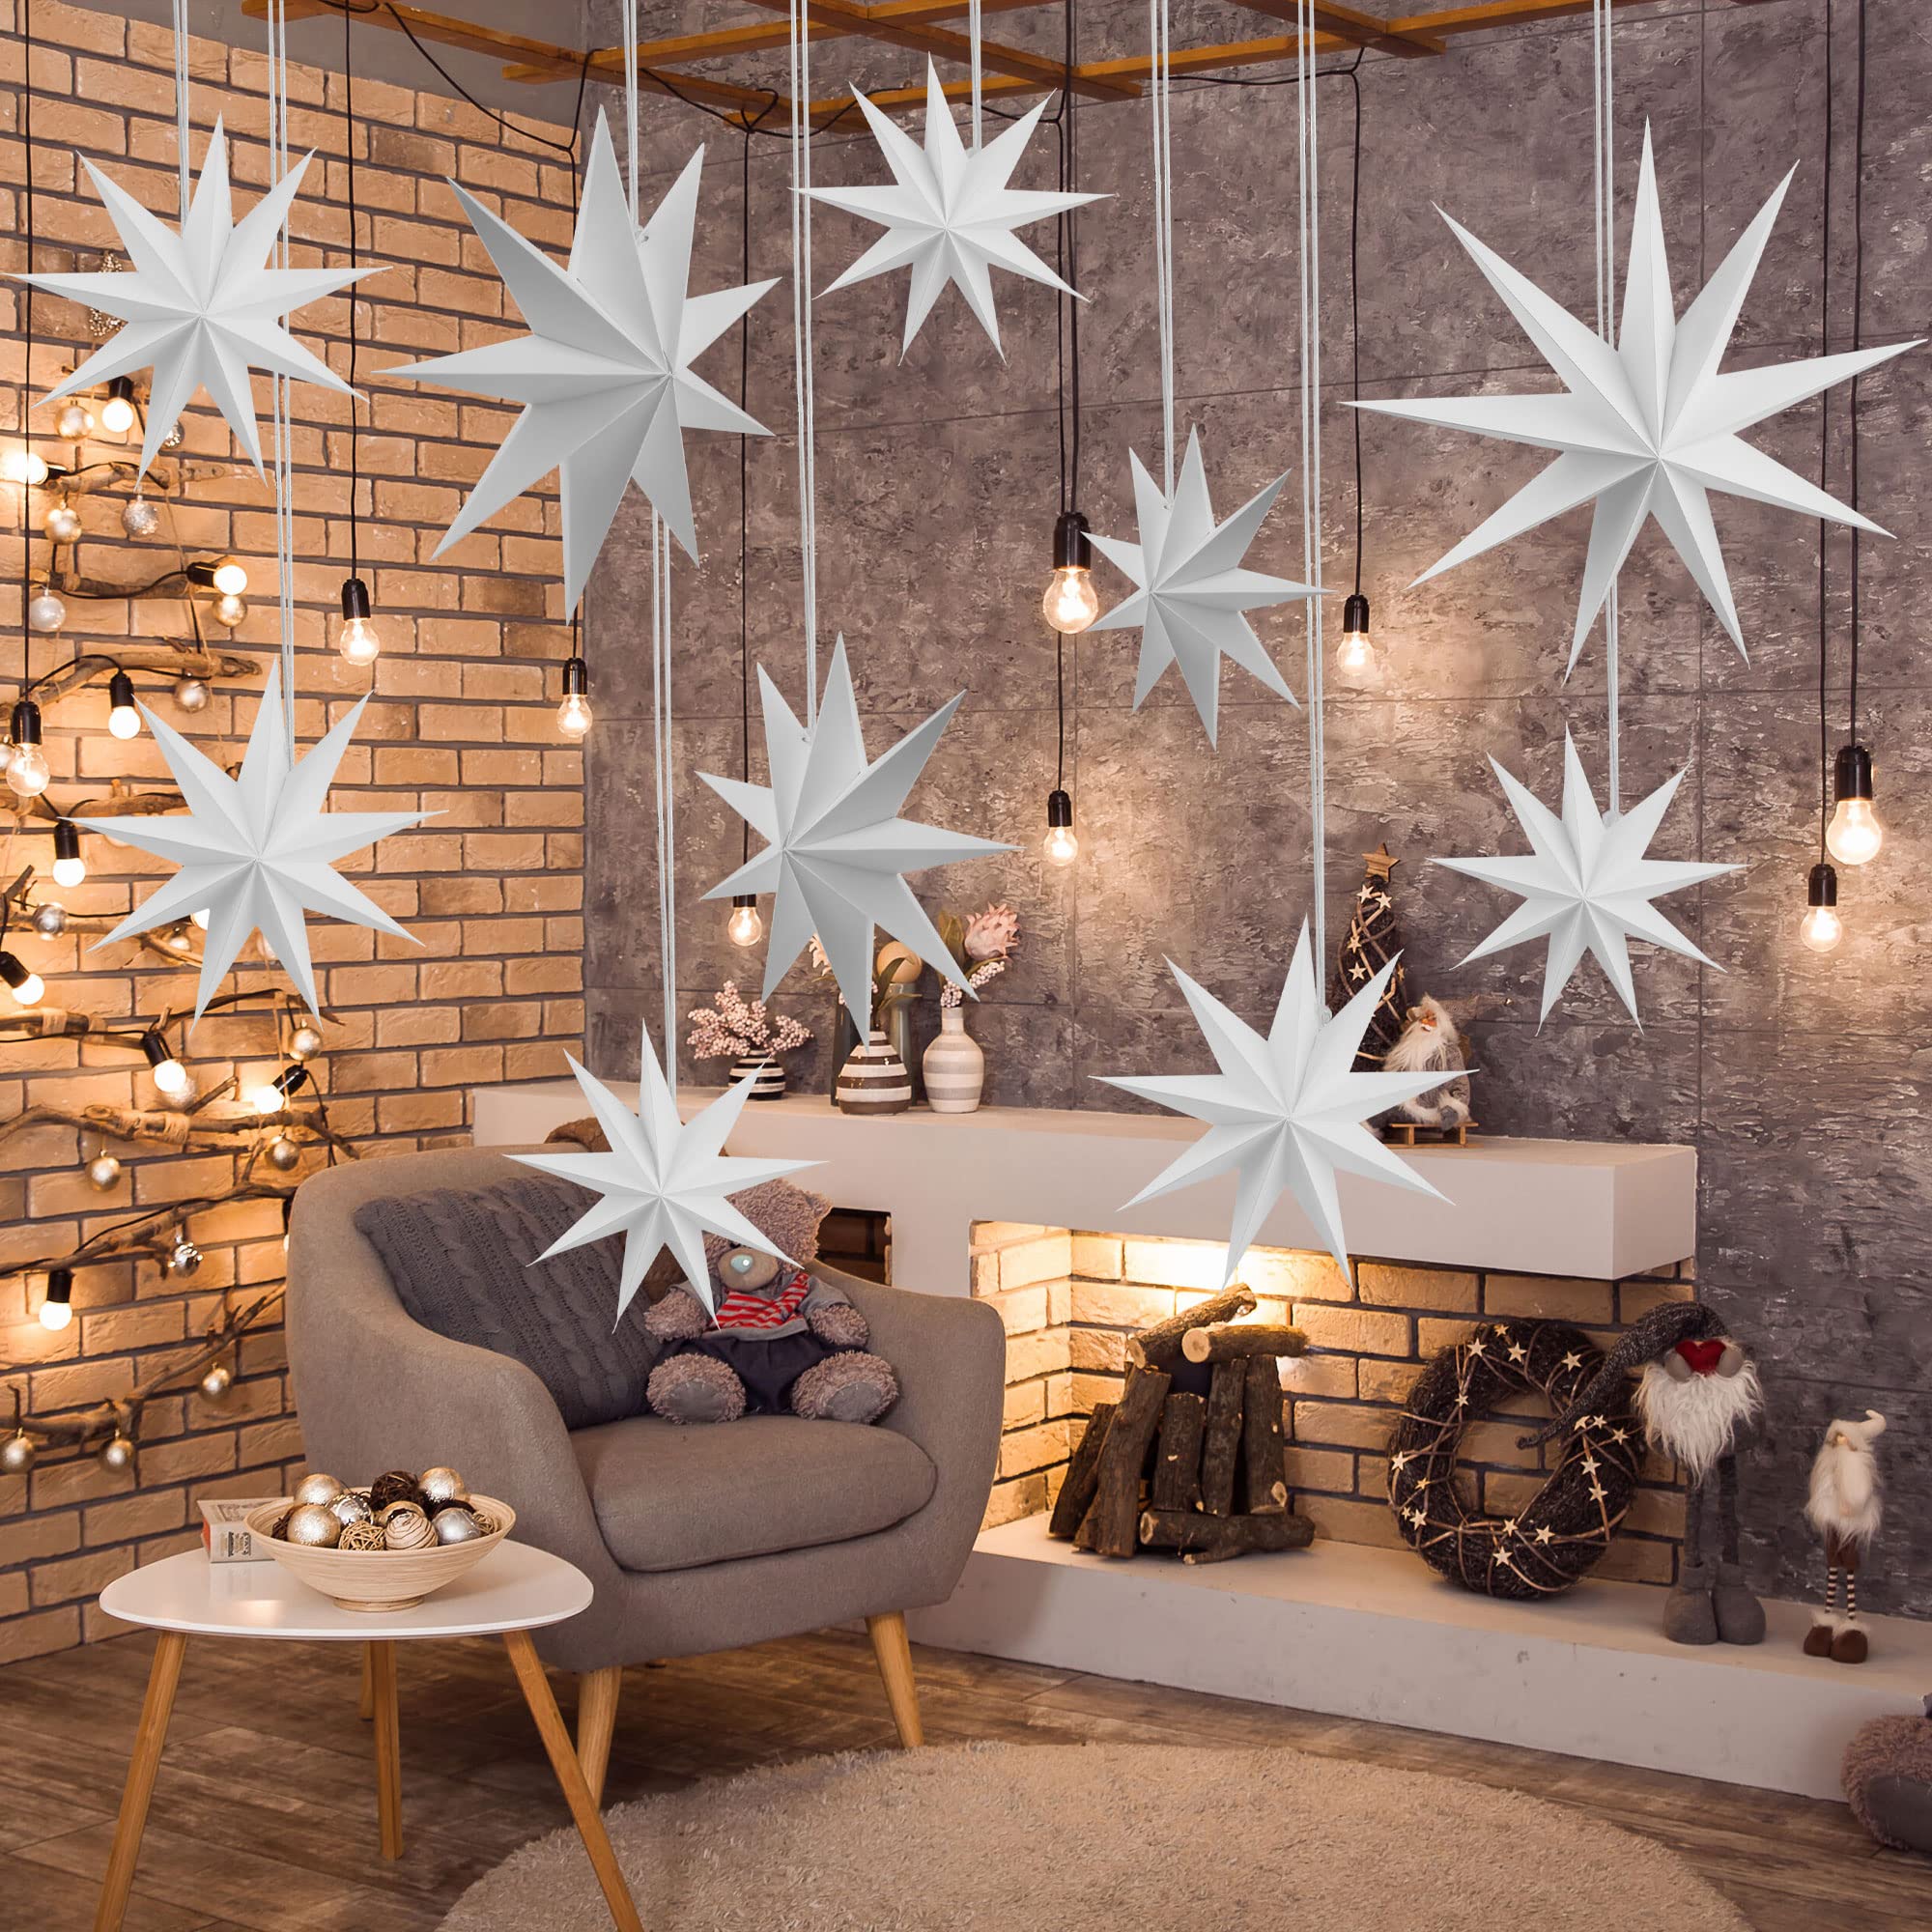 Cotiny 8 Pieces 3D Paper Stars Christmas White 9-Pointed Paper Star Hanging Decorations for Weddings Christmas Birthday Party Home Decor, 3 Size